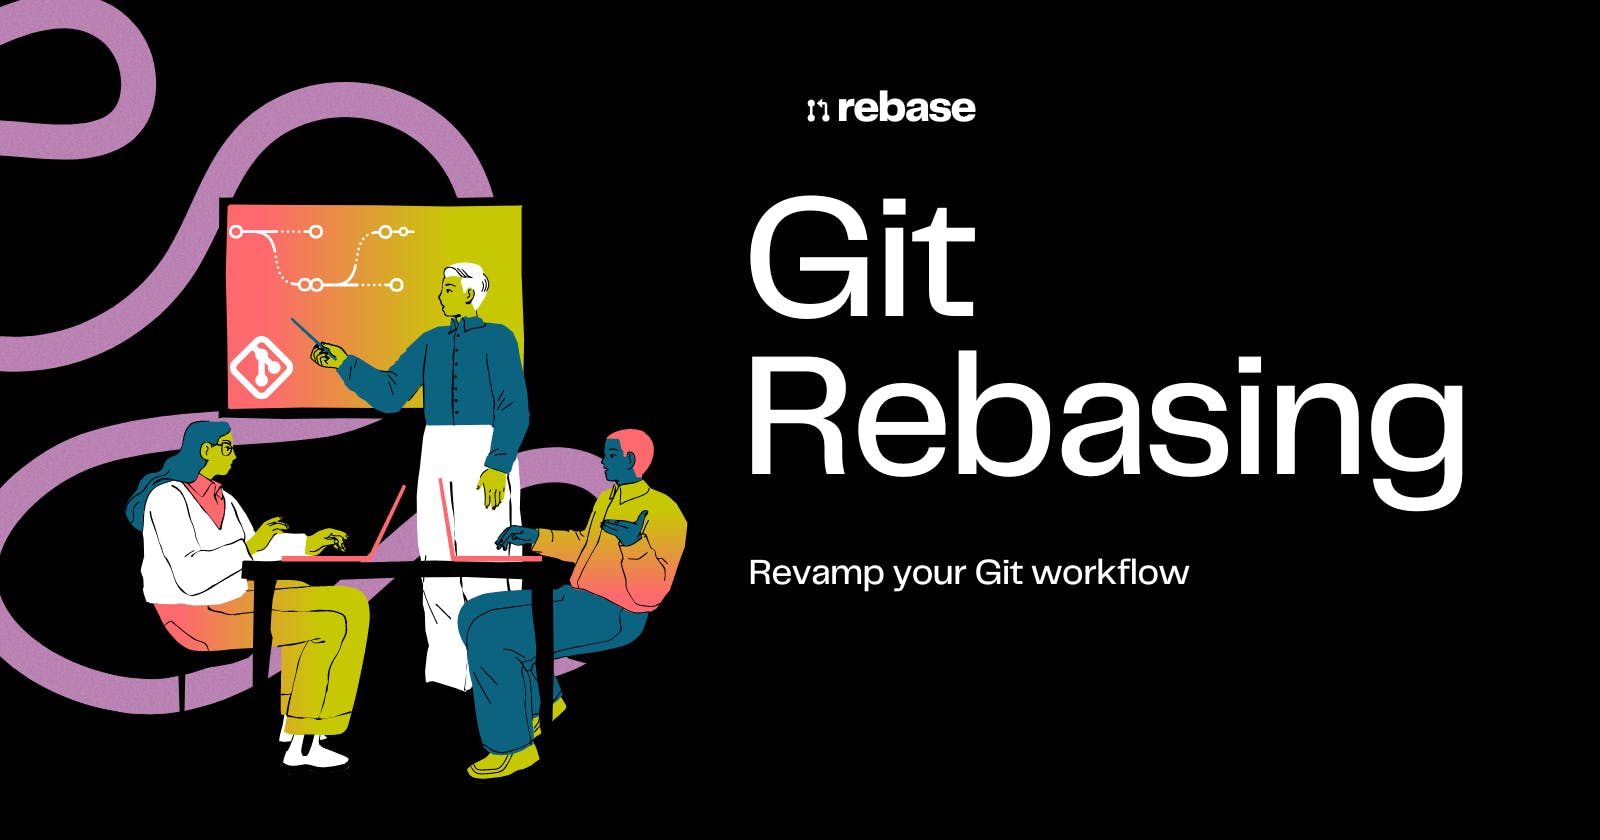 Revamp your Git workflow with the magic of Git Rebasing.